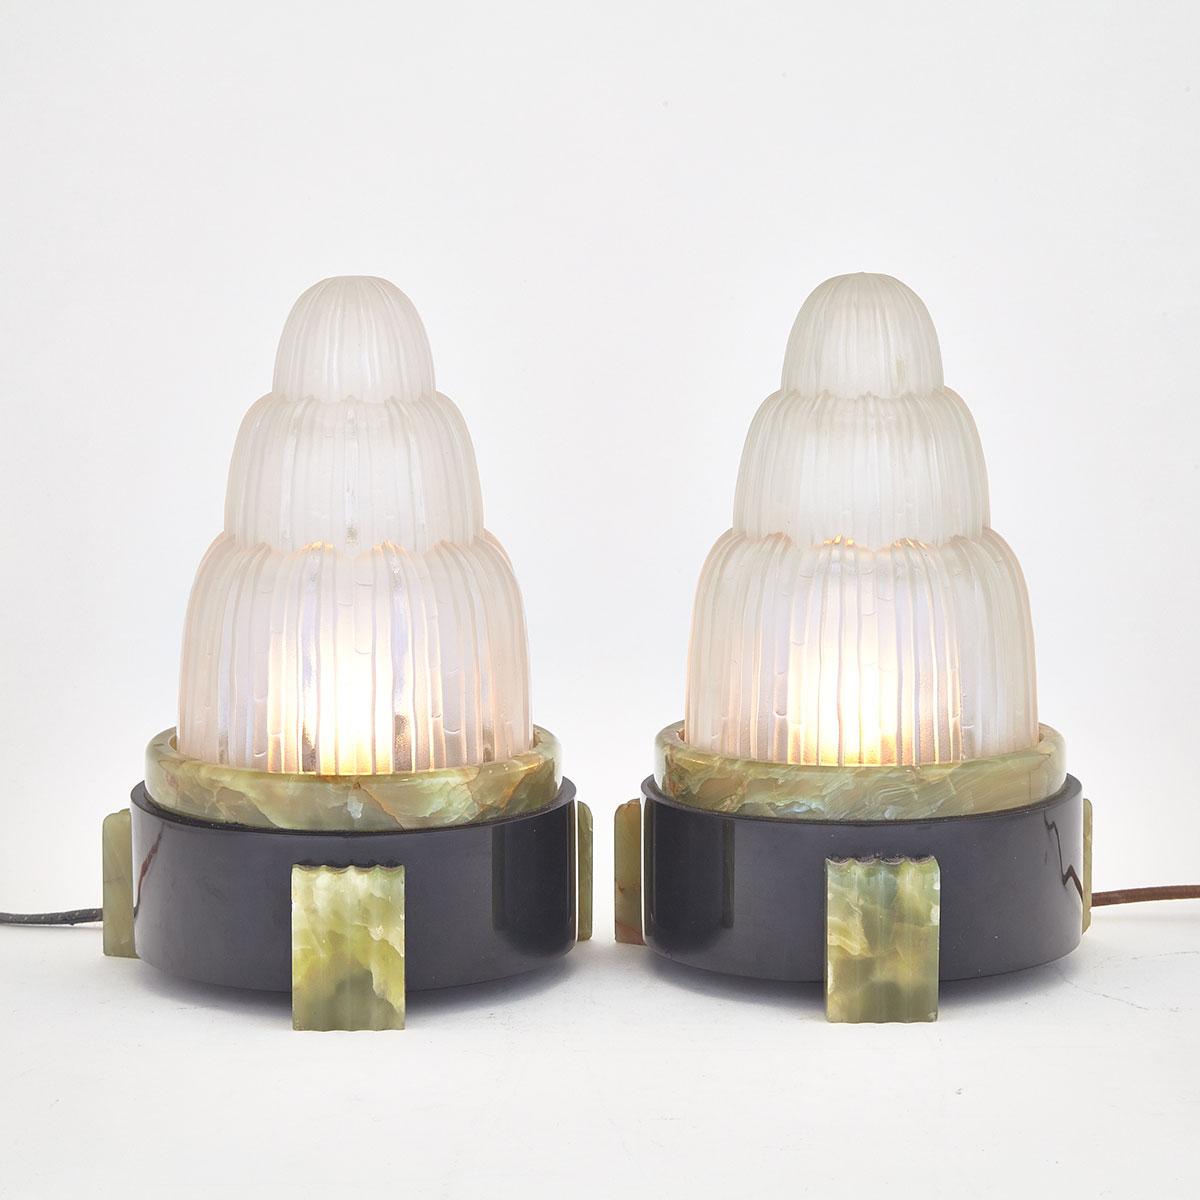 Pair of art deco glass, onyx and marble table lamps by Marius Ernest Sabino (French, 1878-1961) c.1925